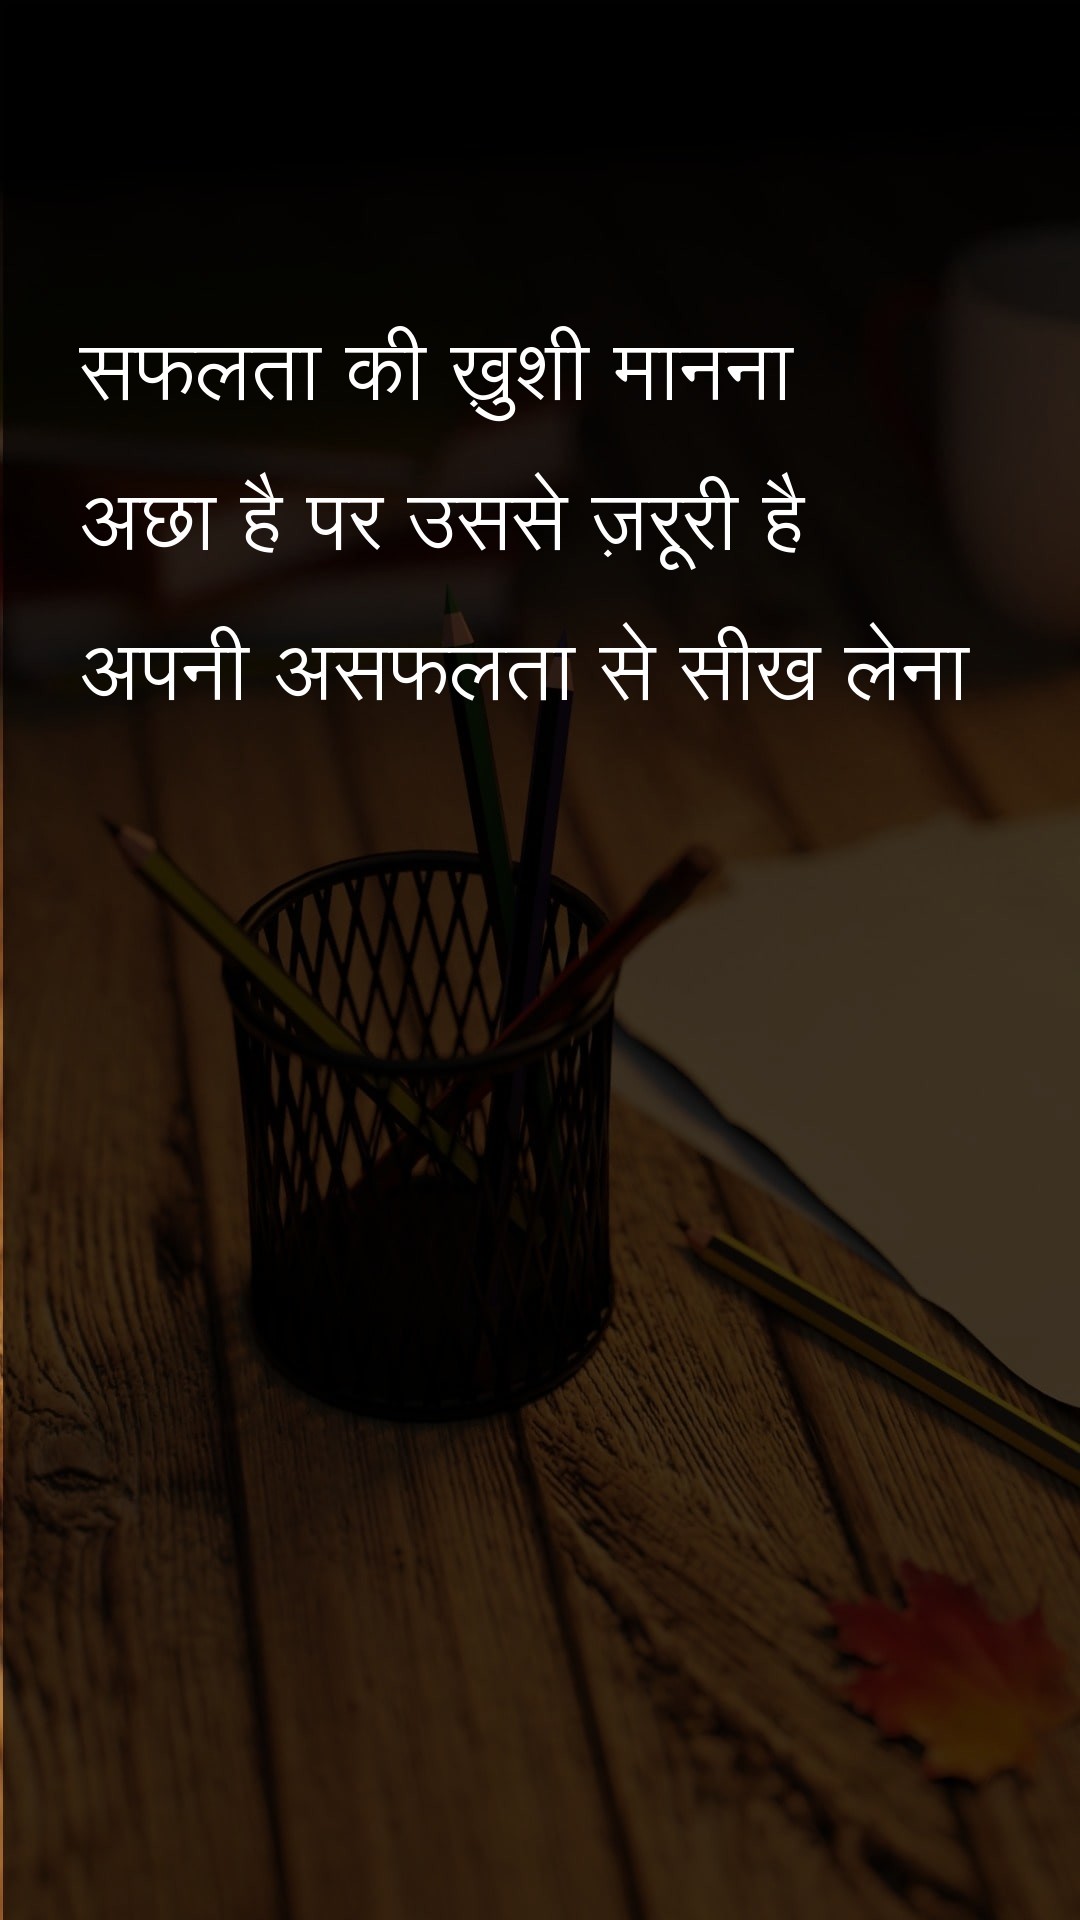 It is good to believe in success Hindi Quotes at statush.com